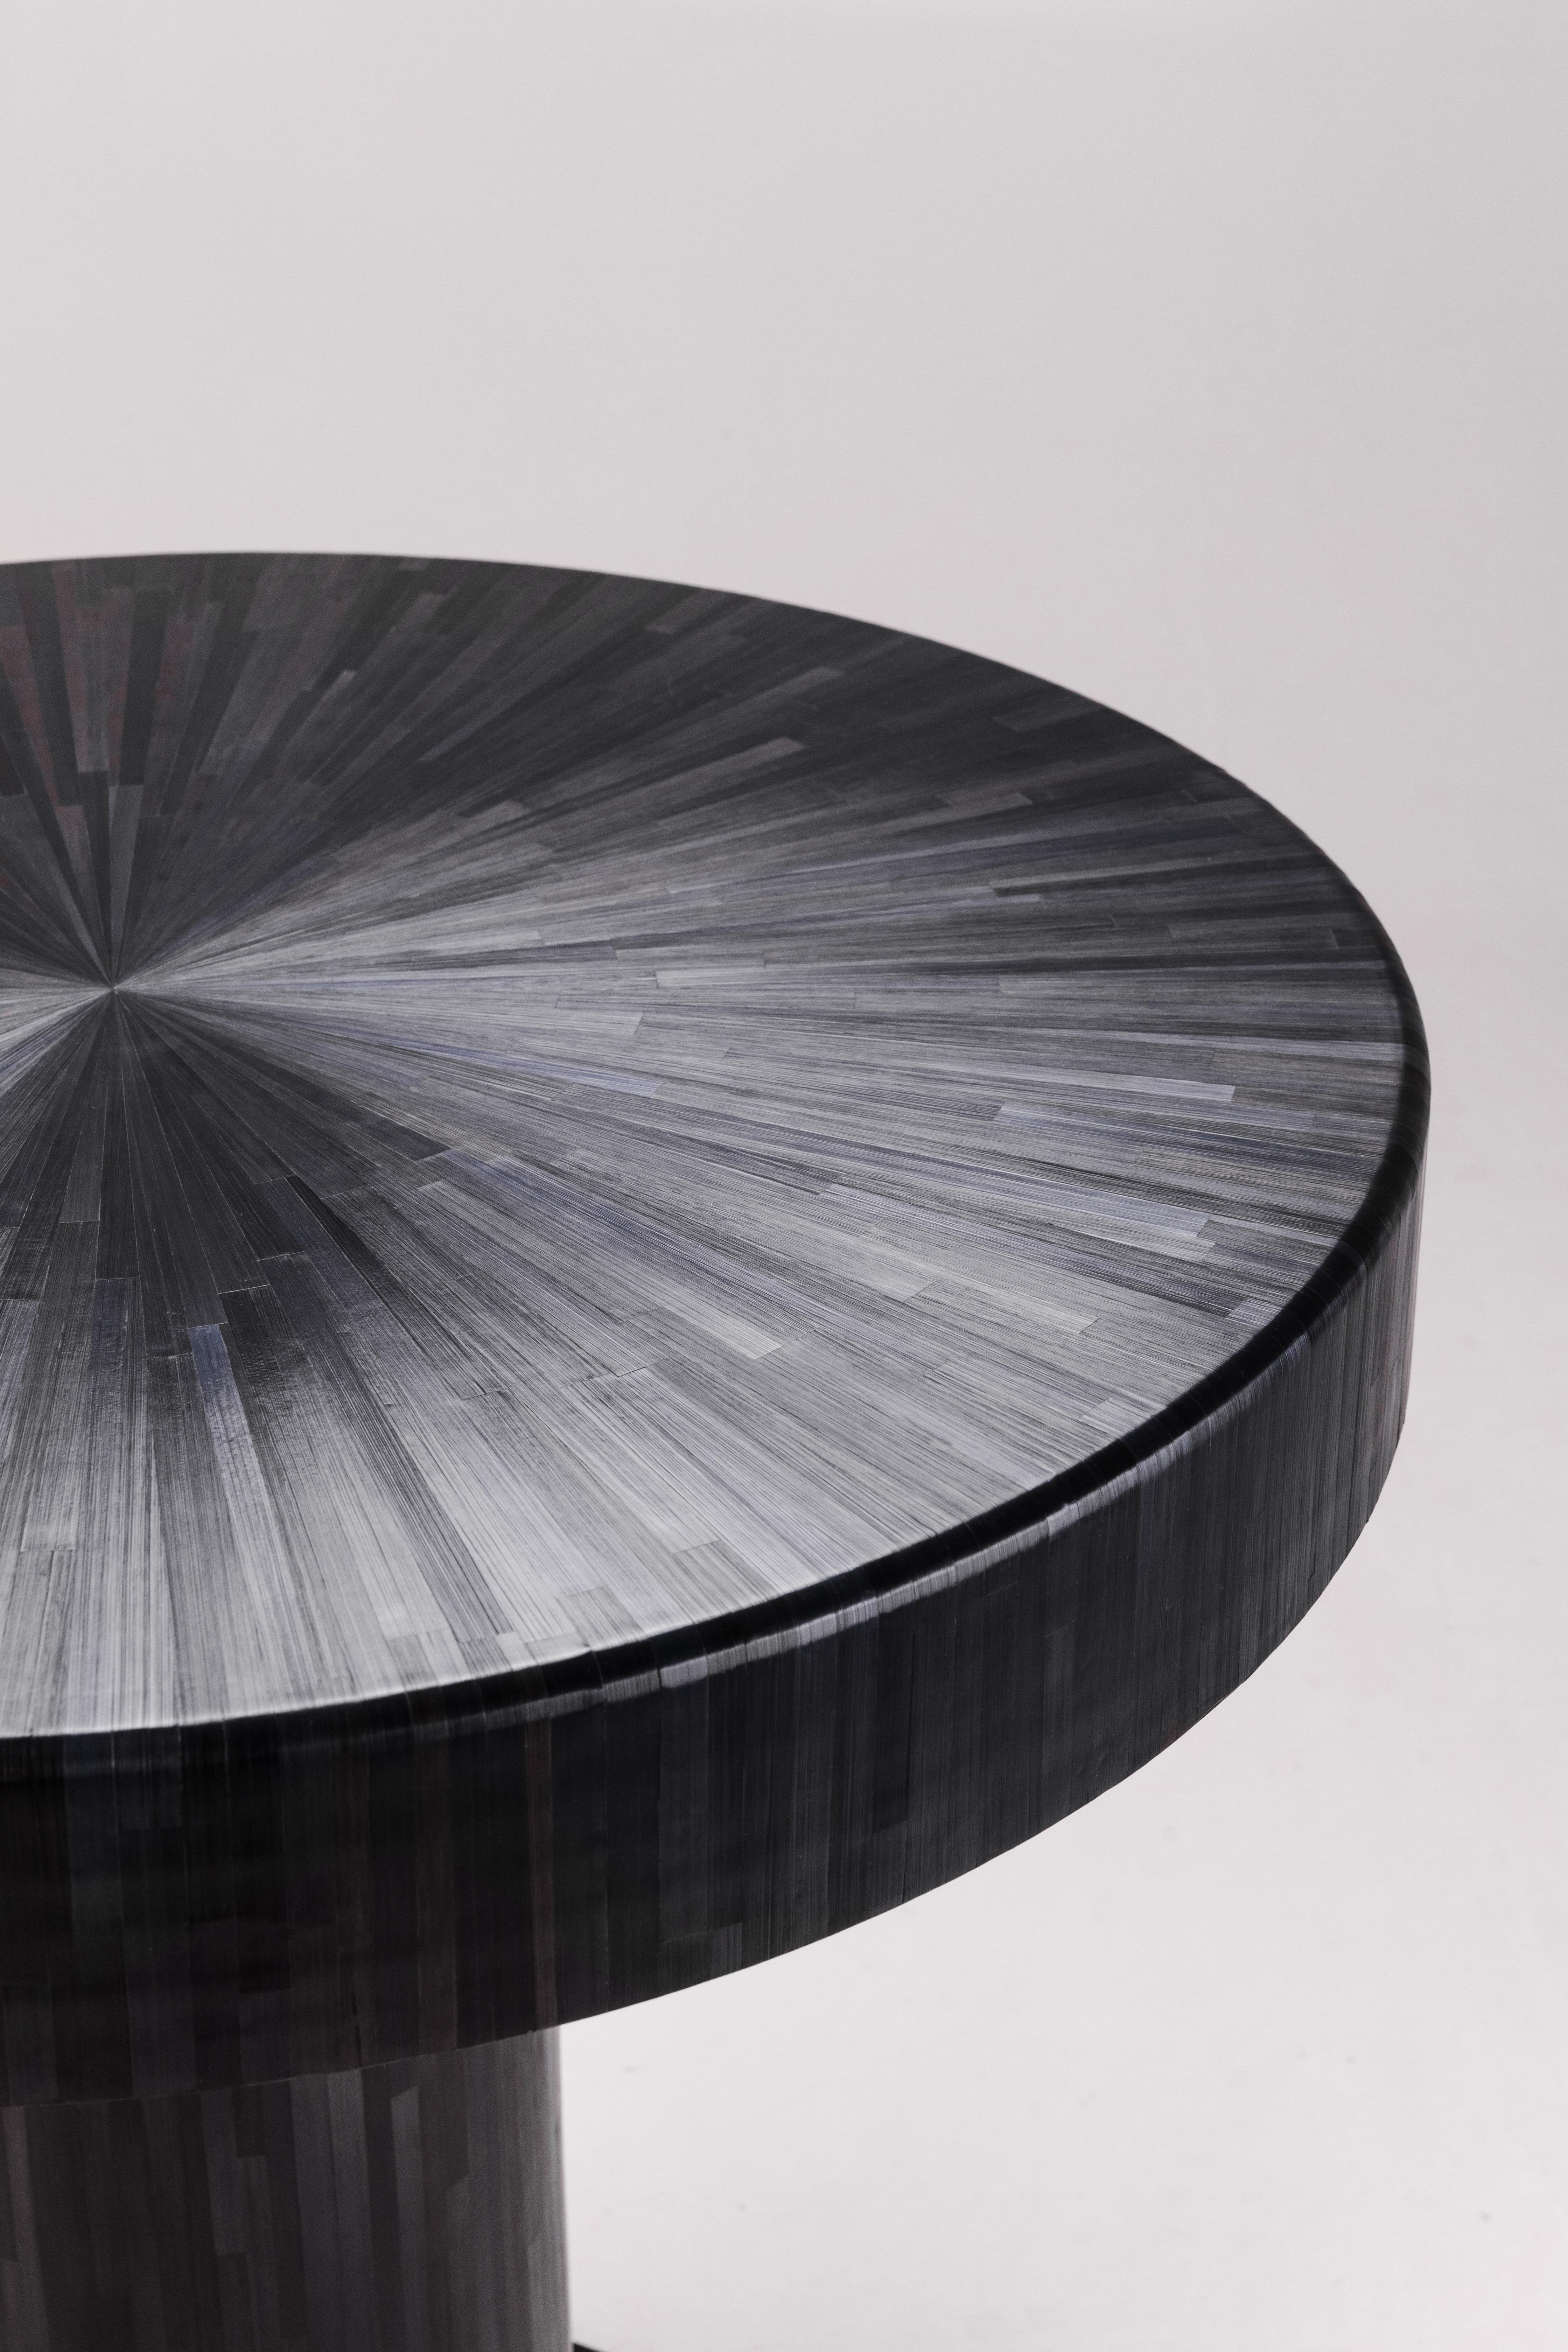 Straw Marquetry Center Table Squid Ink Black 80 cm Hight Hand-Crafted, in stock In New Condition For Sale In Zürich, CH